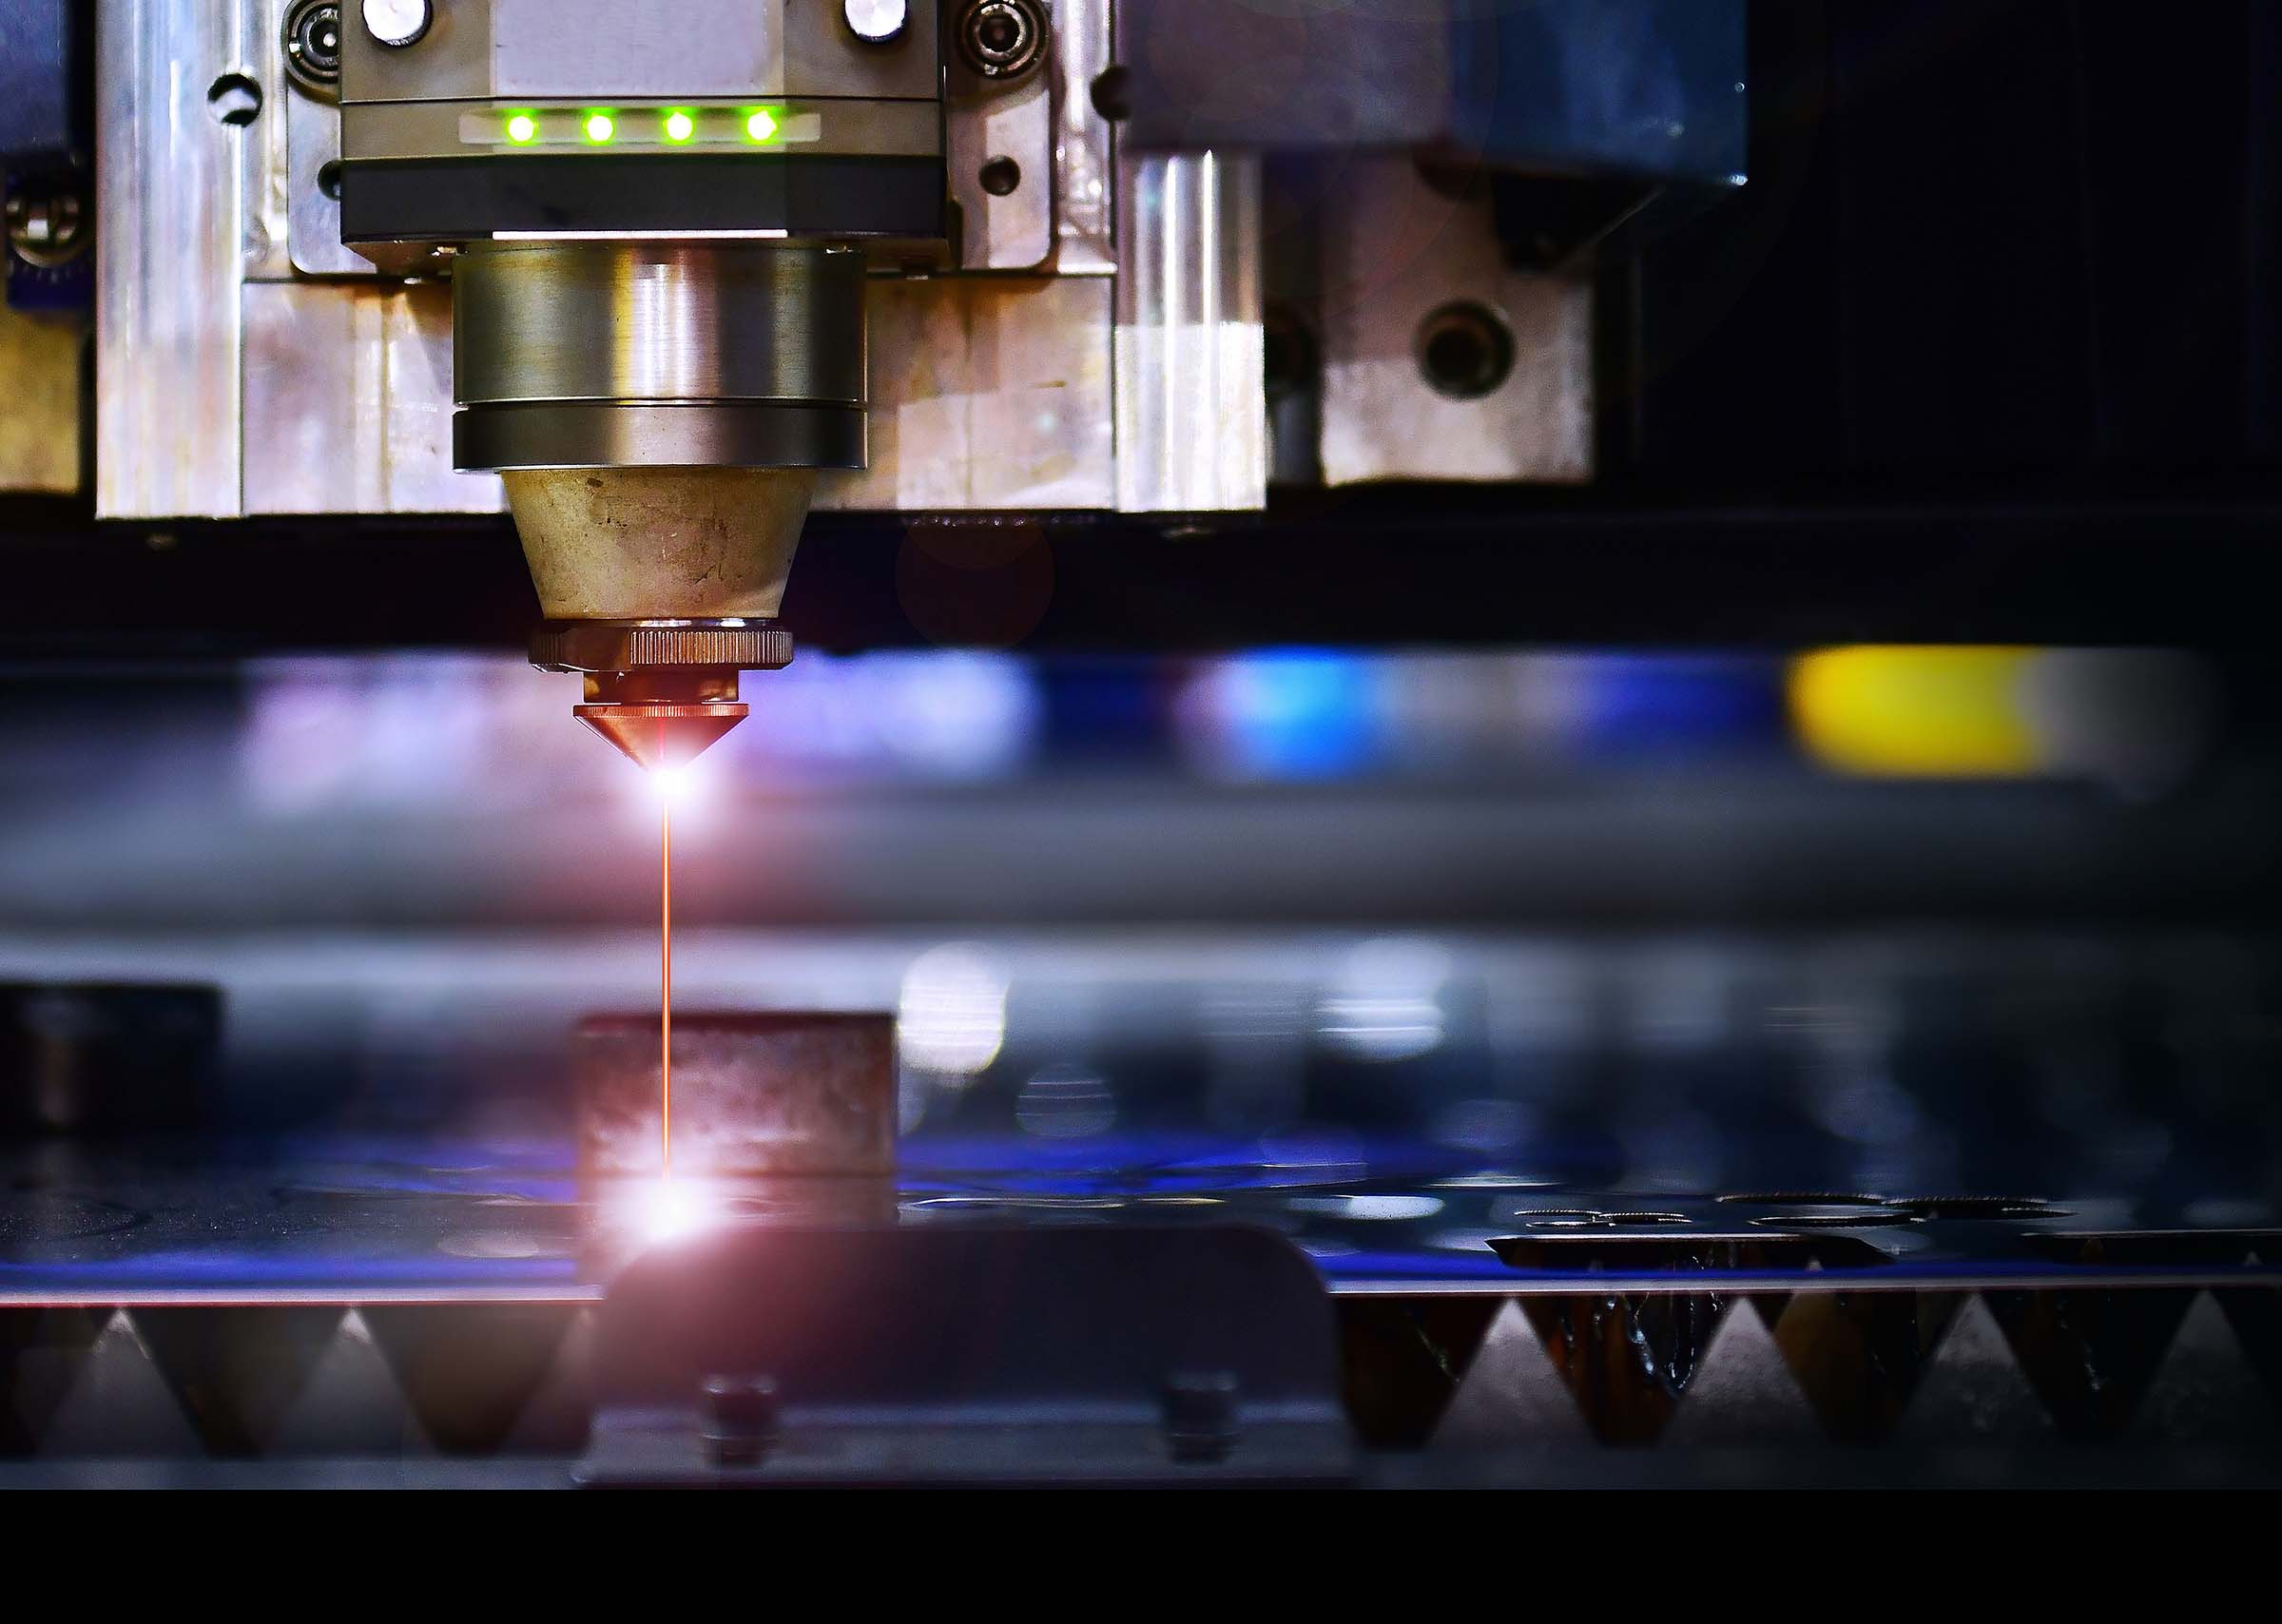 in manufacturing, laser technology is used predominantly for cutting metals.